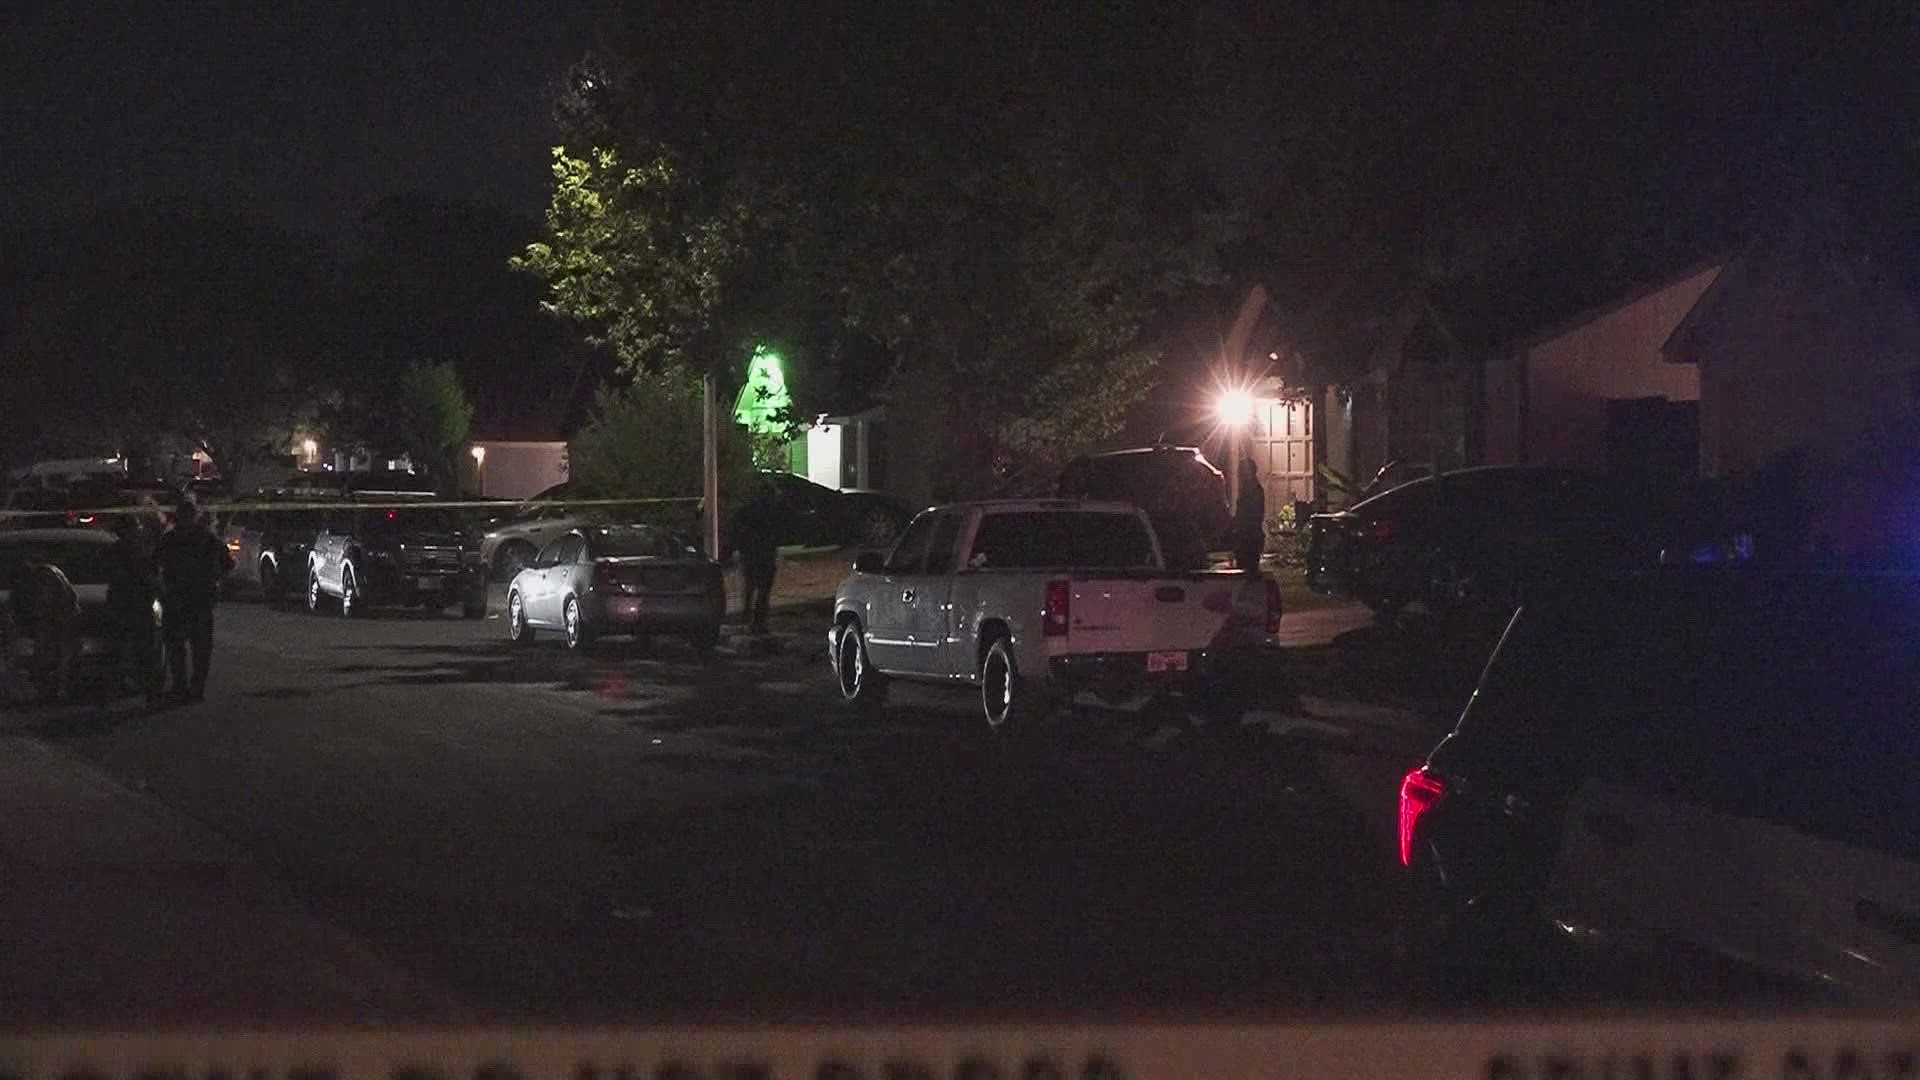 A man was shot and killed at a graduation party on the city's far west side, the San Antonio Police Department said.